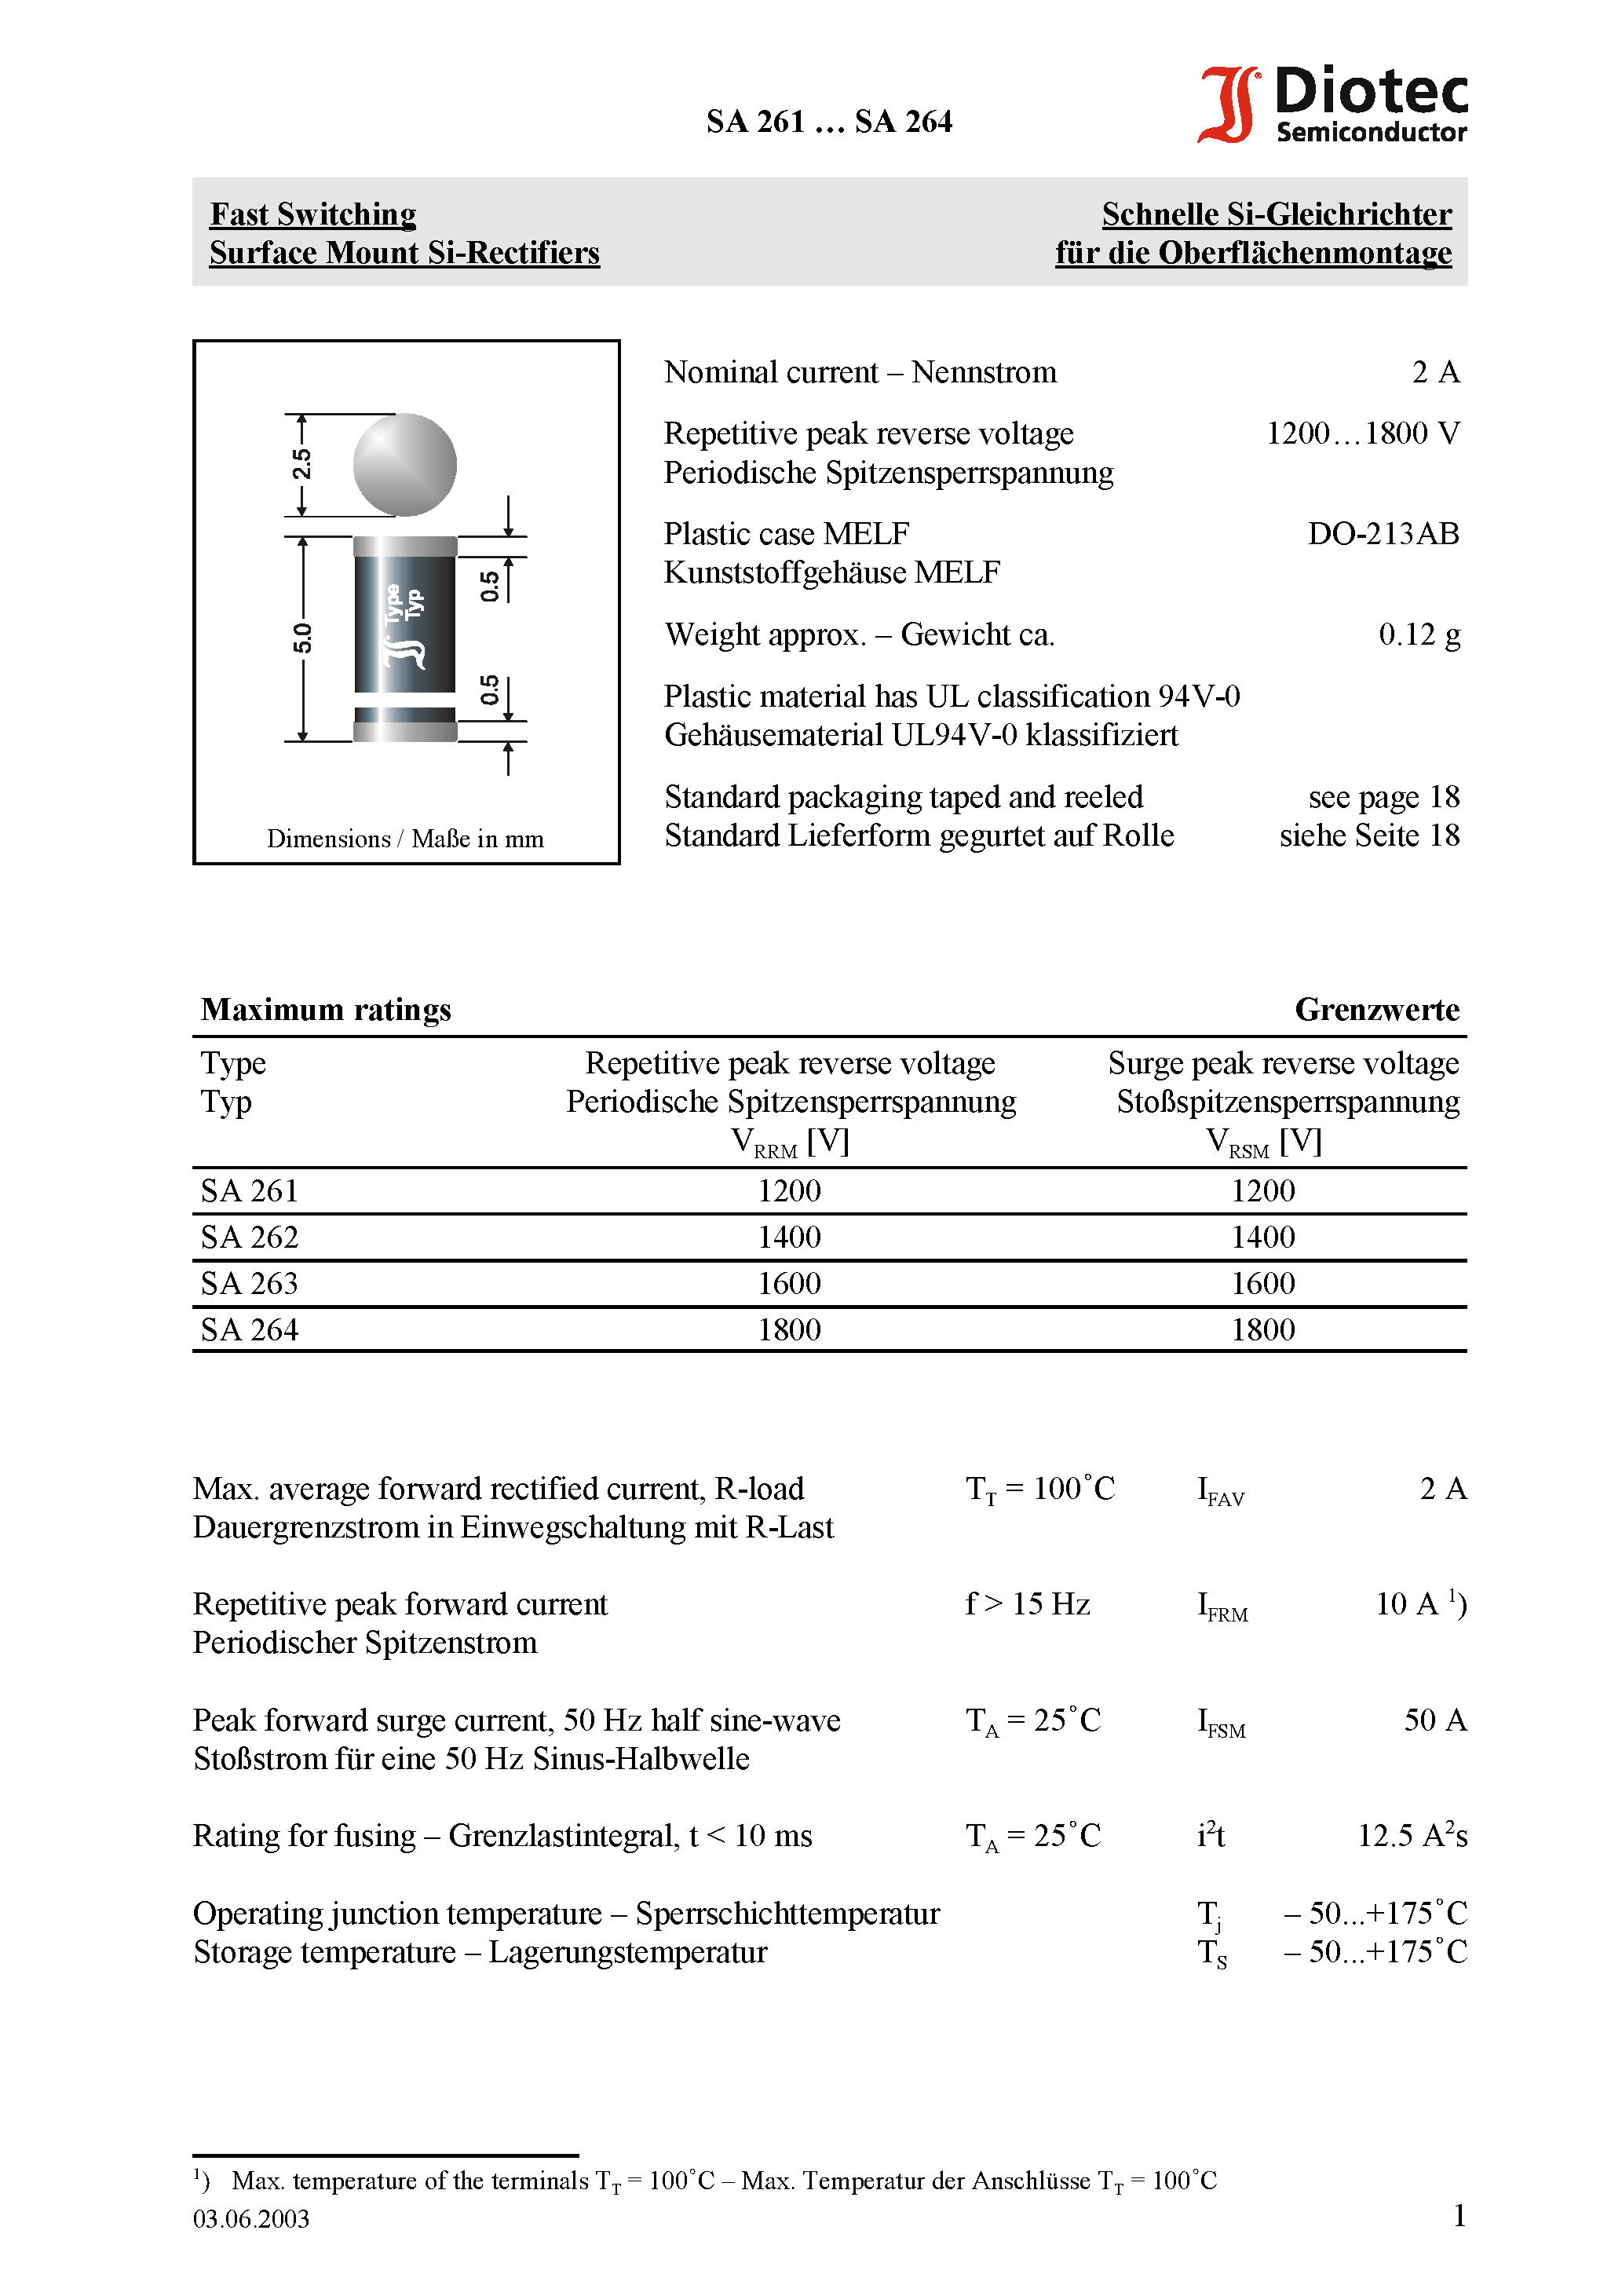 Datasheet SA261 - Fast Switching Surface Mount Si-Rectifiers page 1